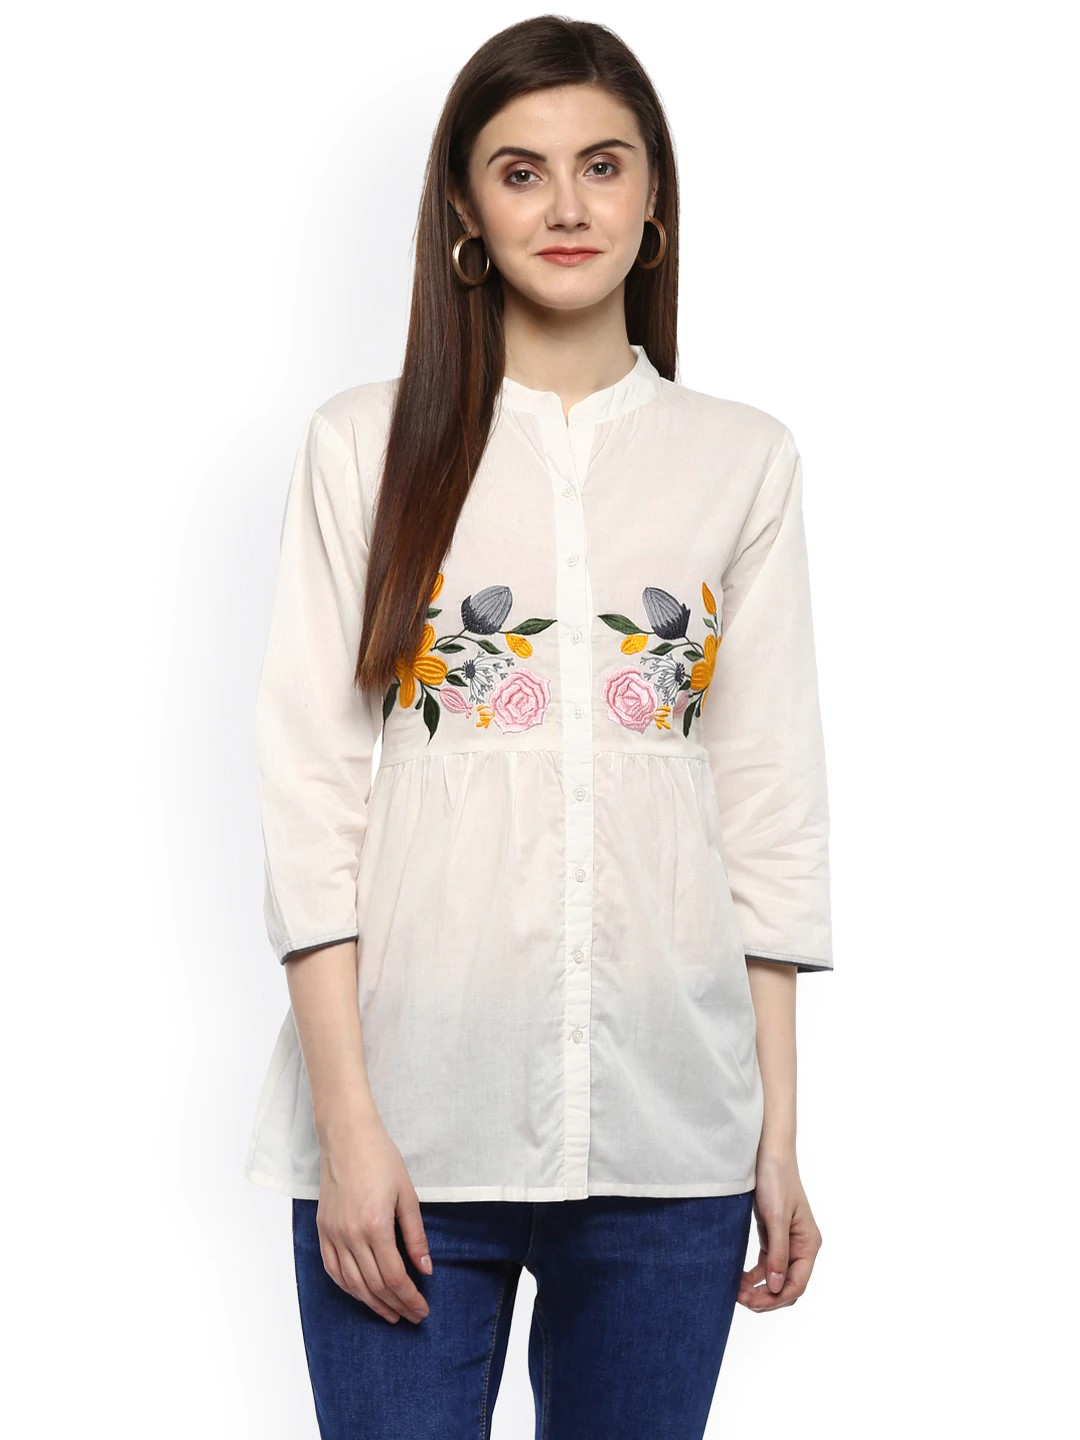 Women's  White Solid Shirt Style Top - Wahe-NOOR